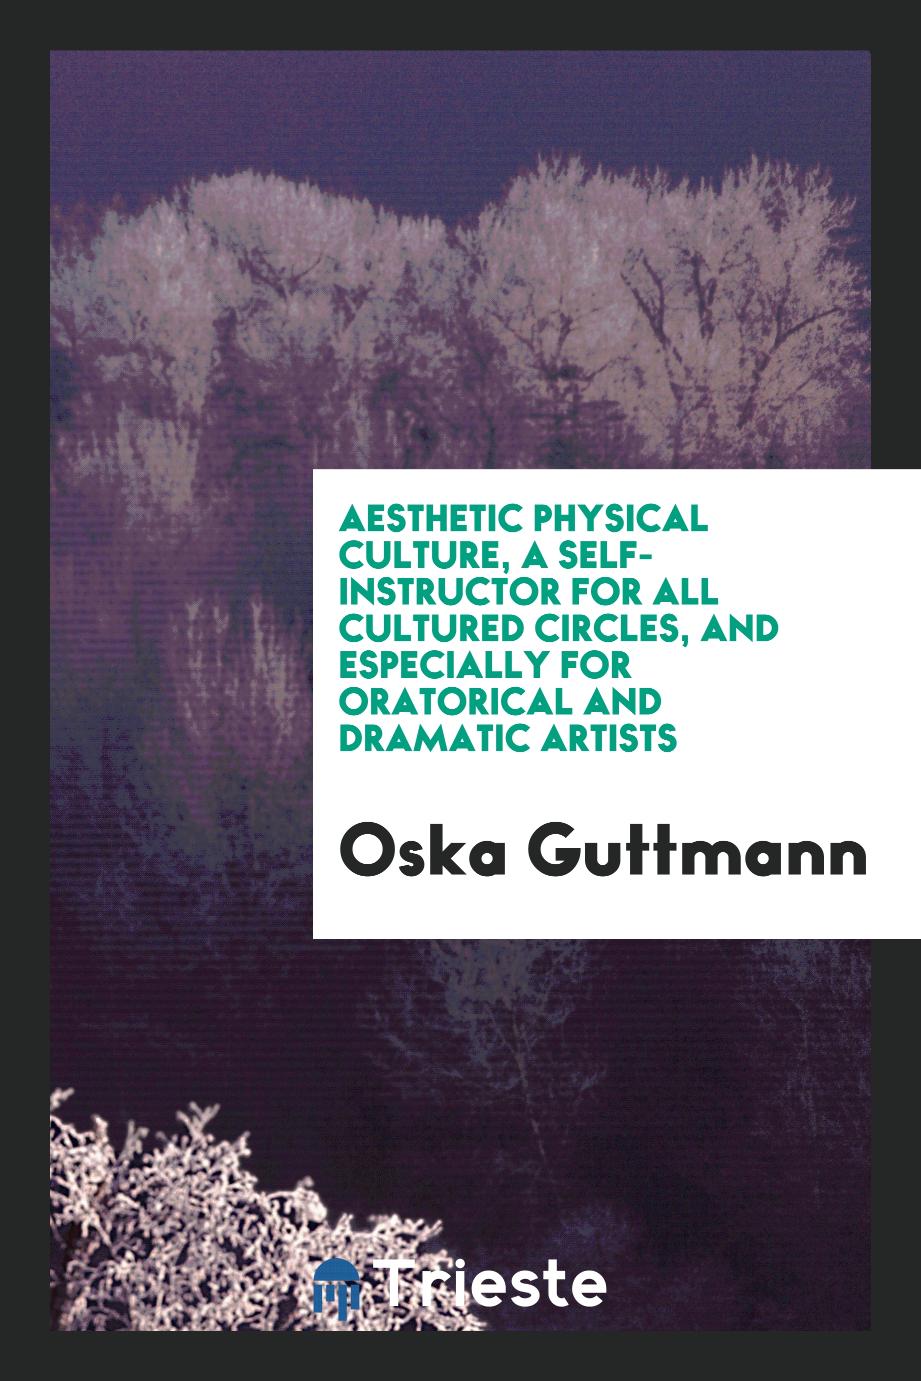 Aesthetic physical culture, a self-instructor for all cultured circles, and especially for oratorical and dramatic artists